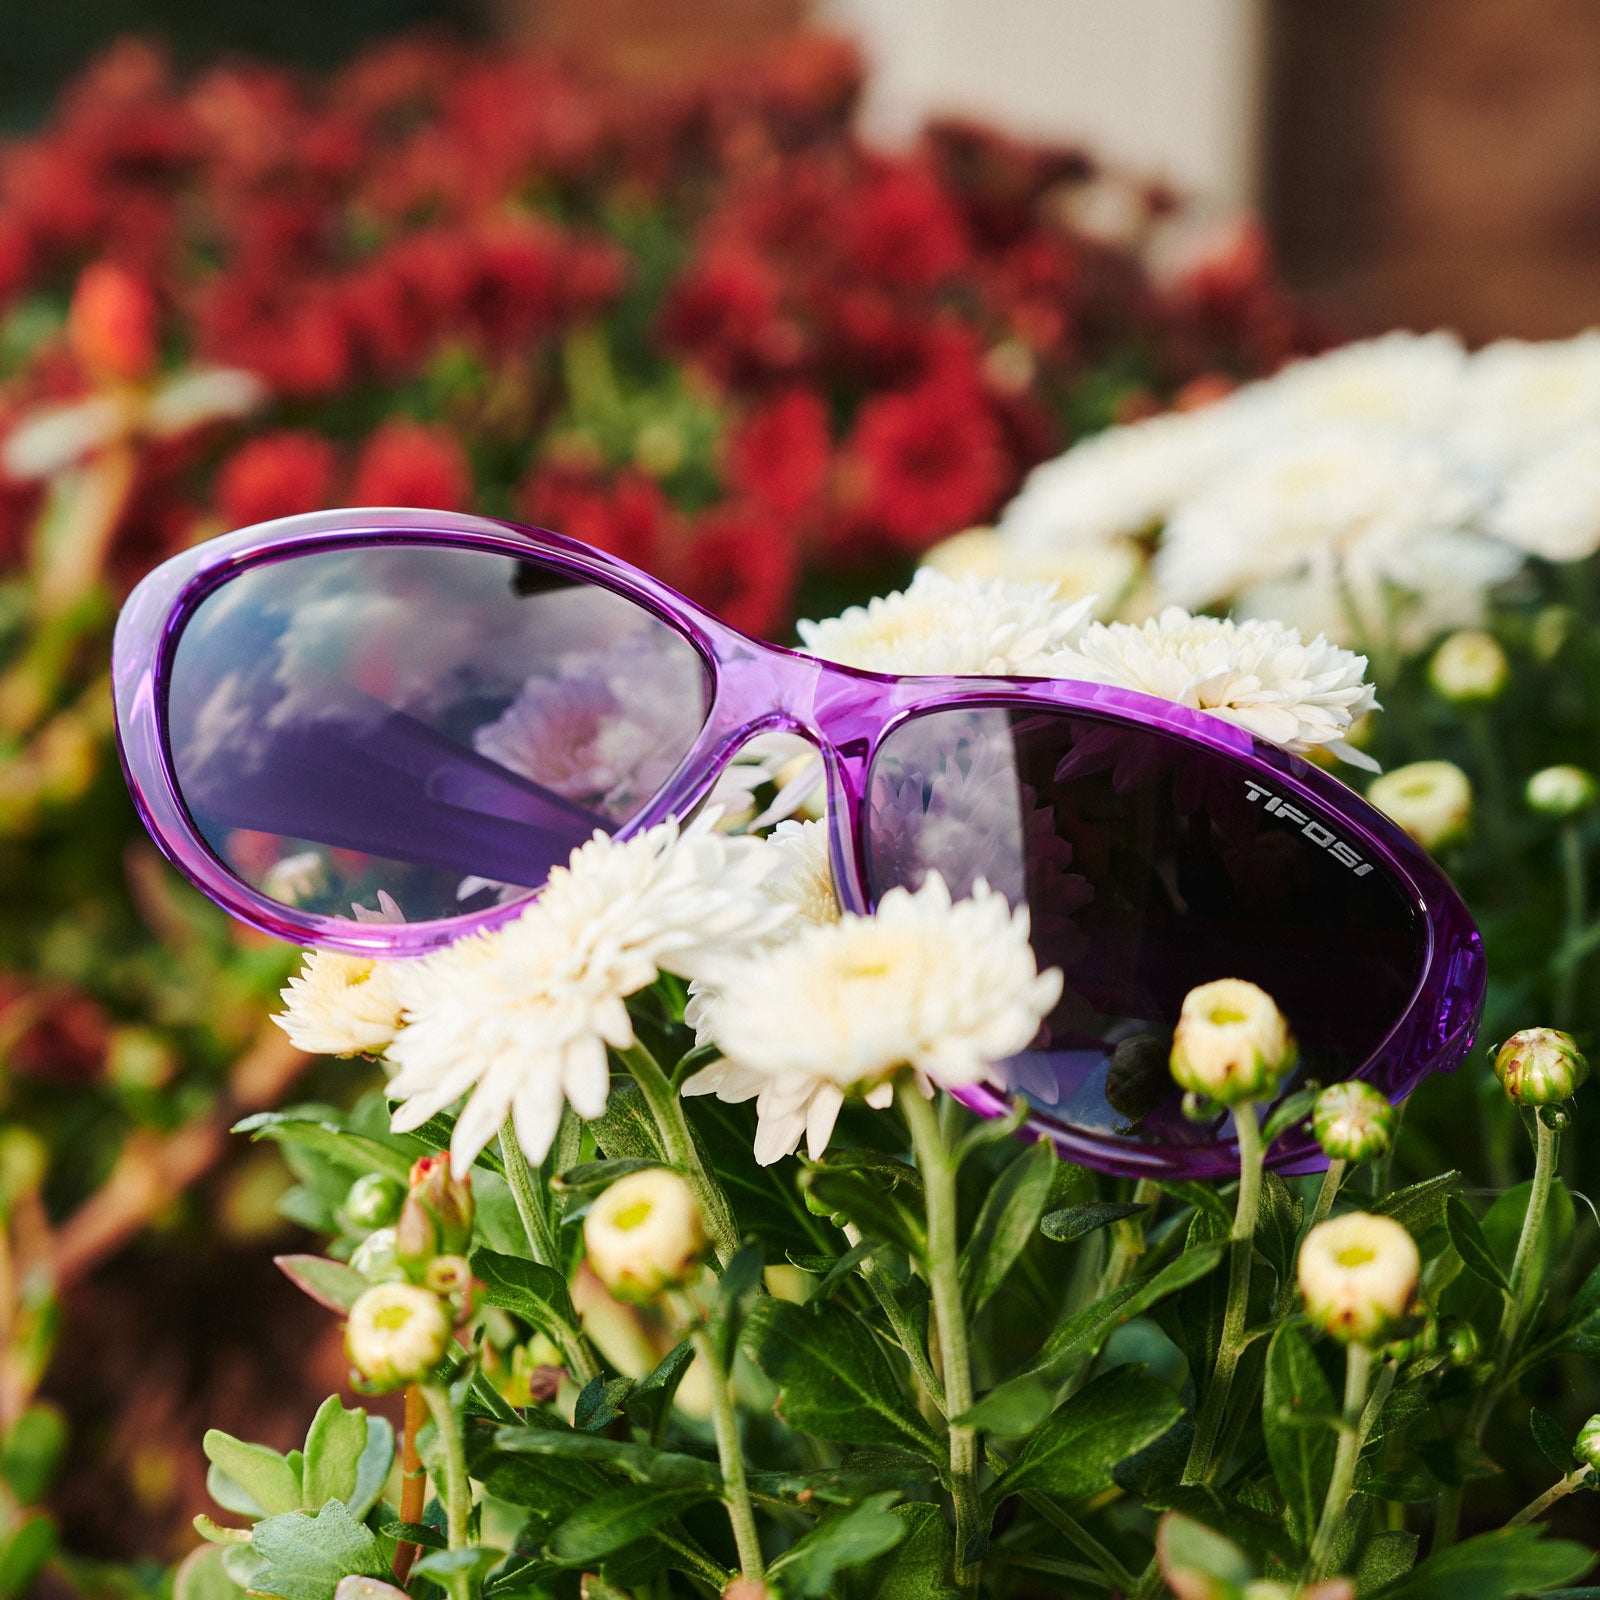 Shirley sport sunglasses in ultra violet